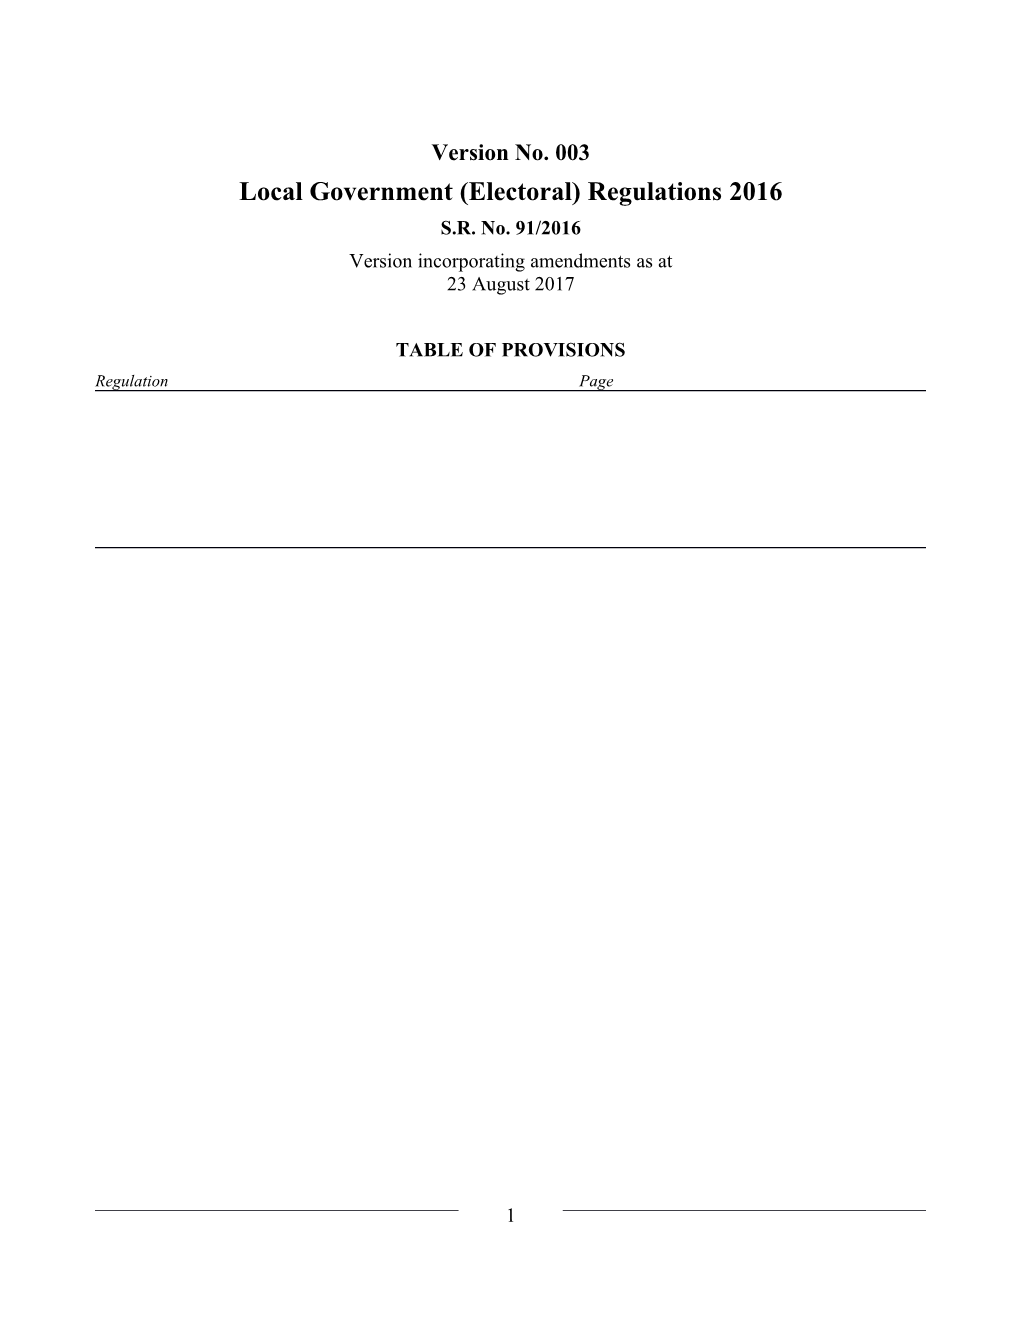 Local Government (Electoral) Regulations 2016